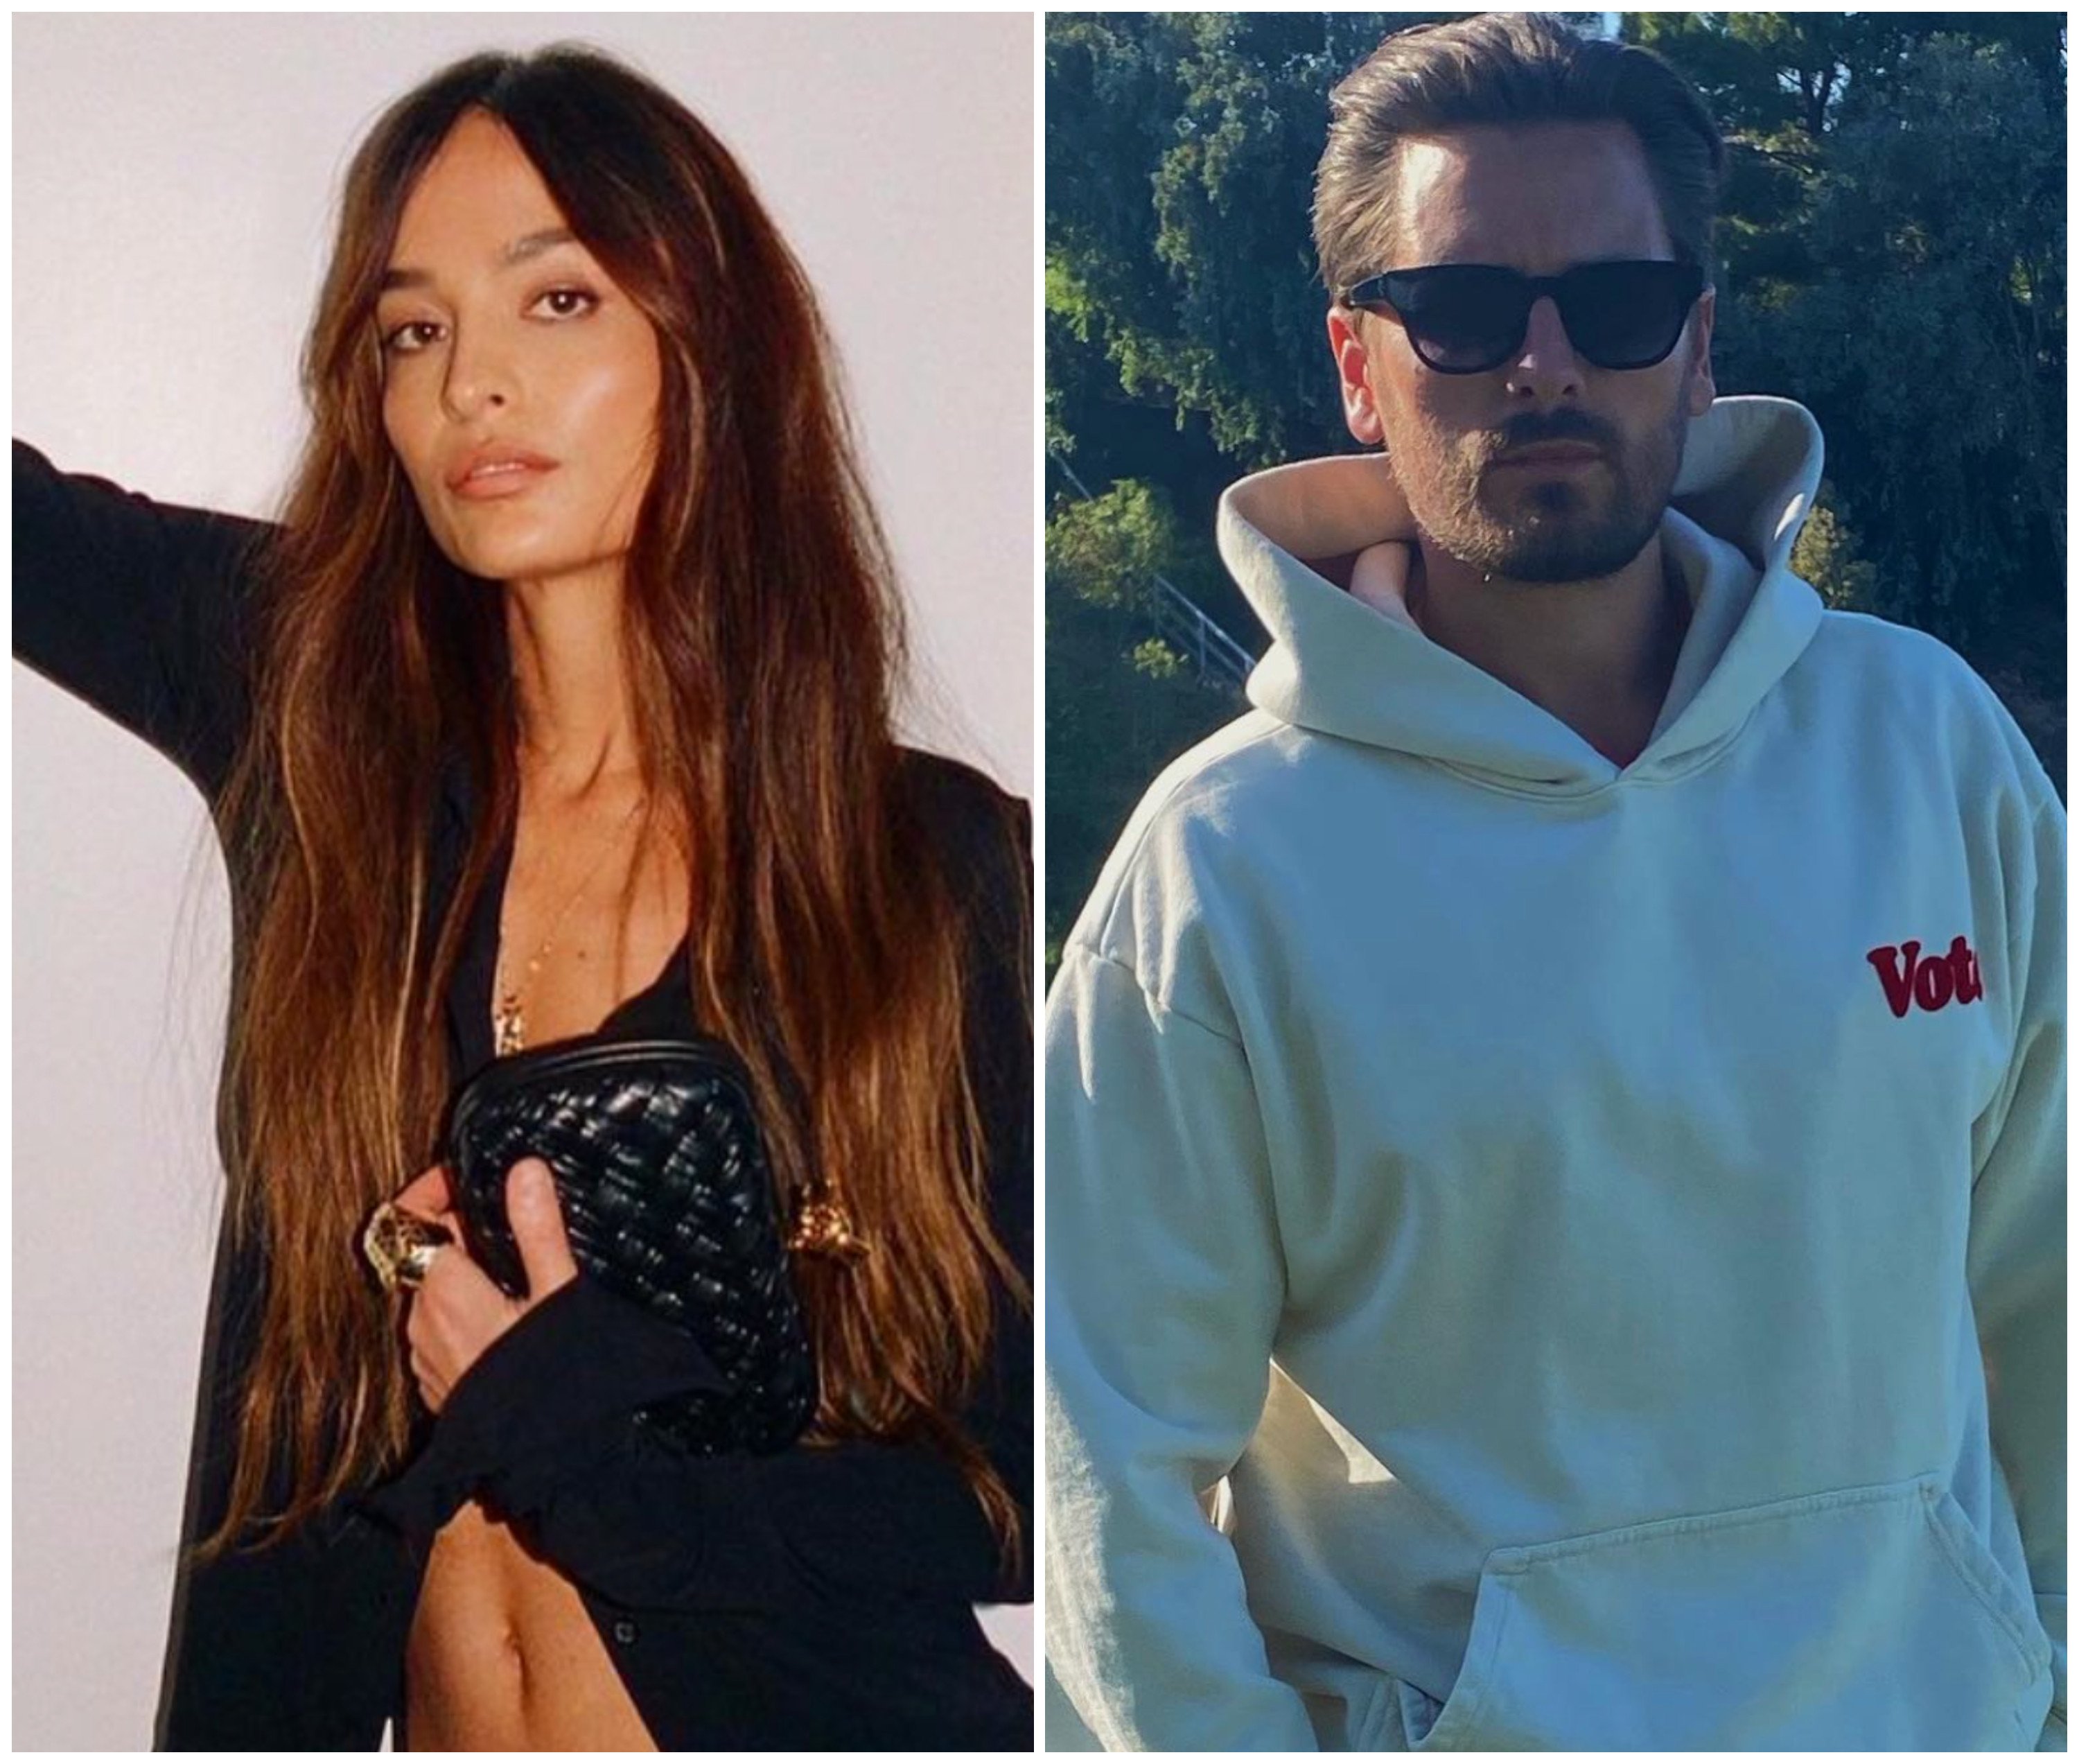 It looks like Chloe Bartoli might be back together with her former flame, Scott Disick. Photos: @chloebartoli, @letthelordbewithyou/Instagram